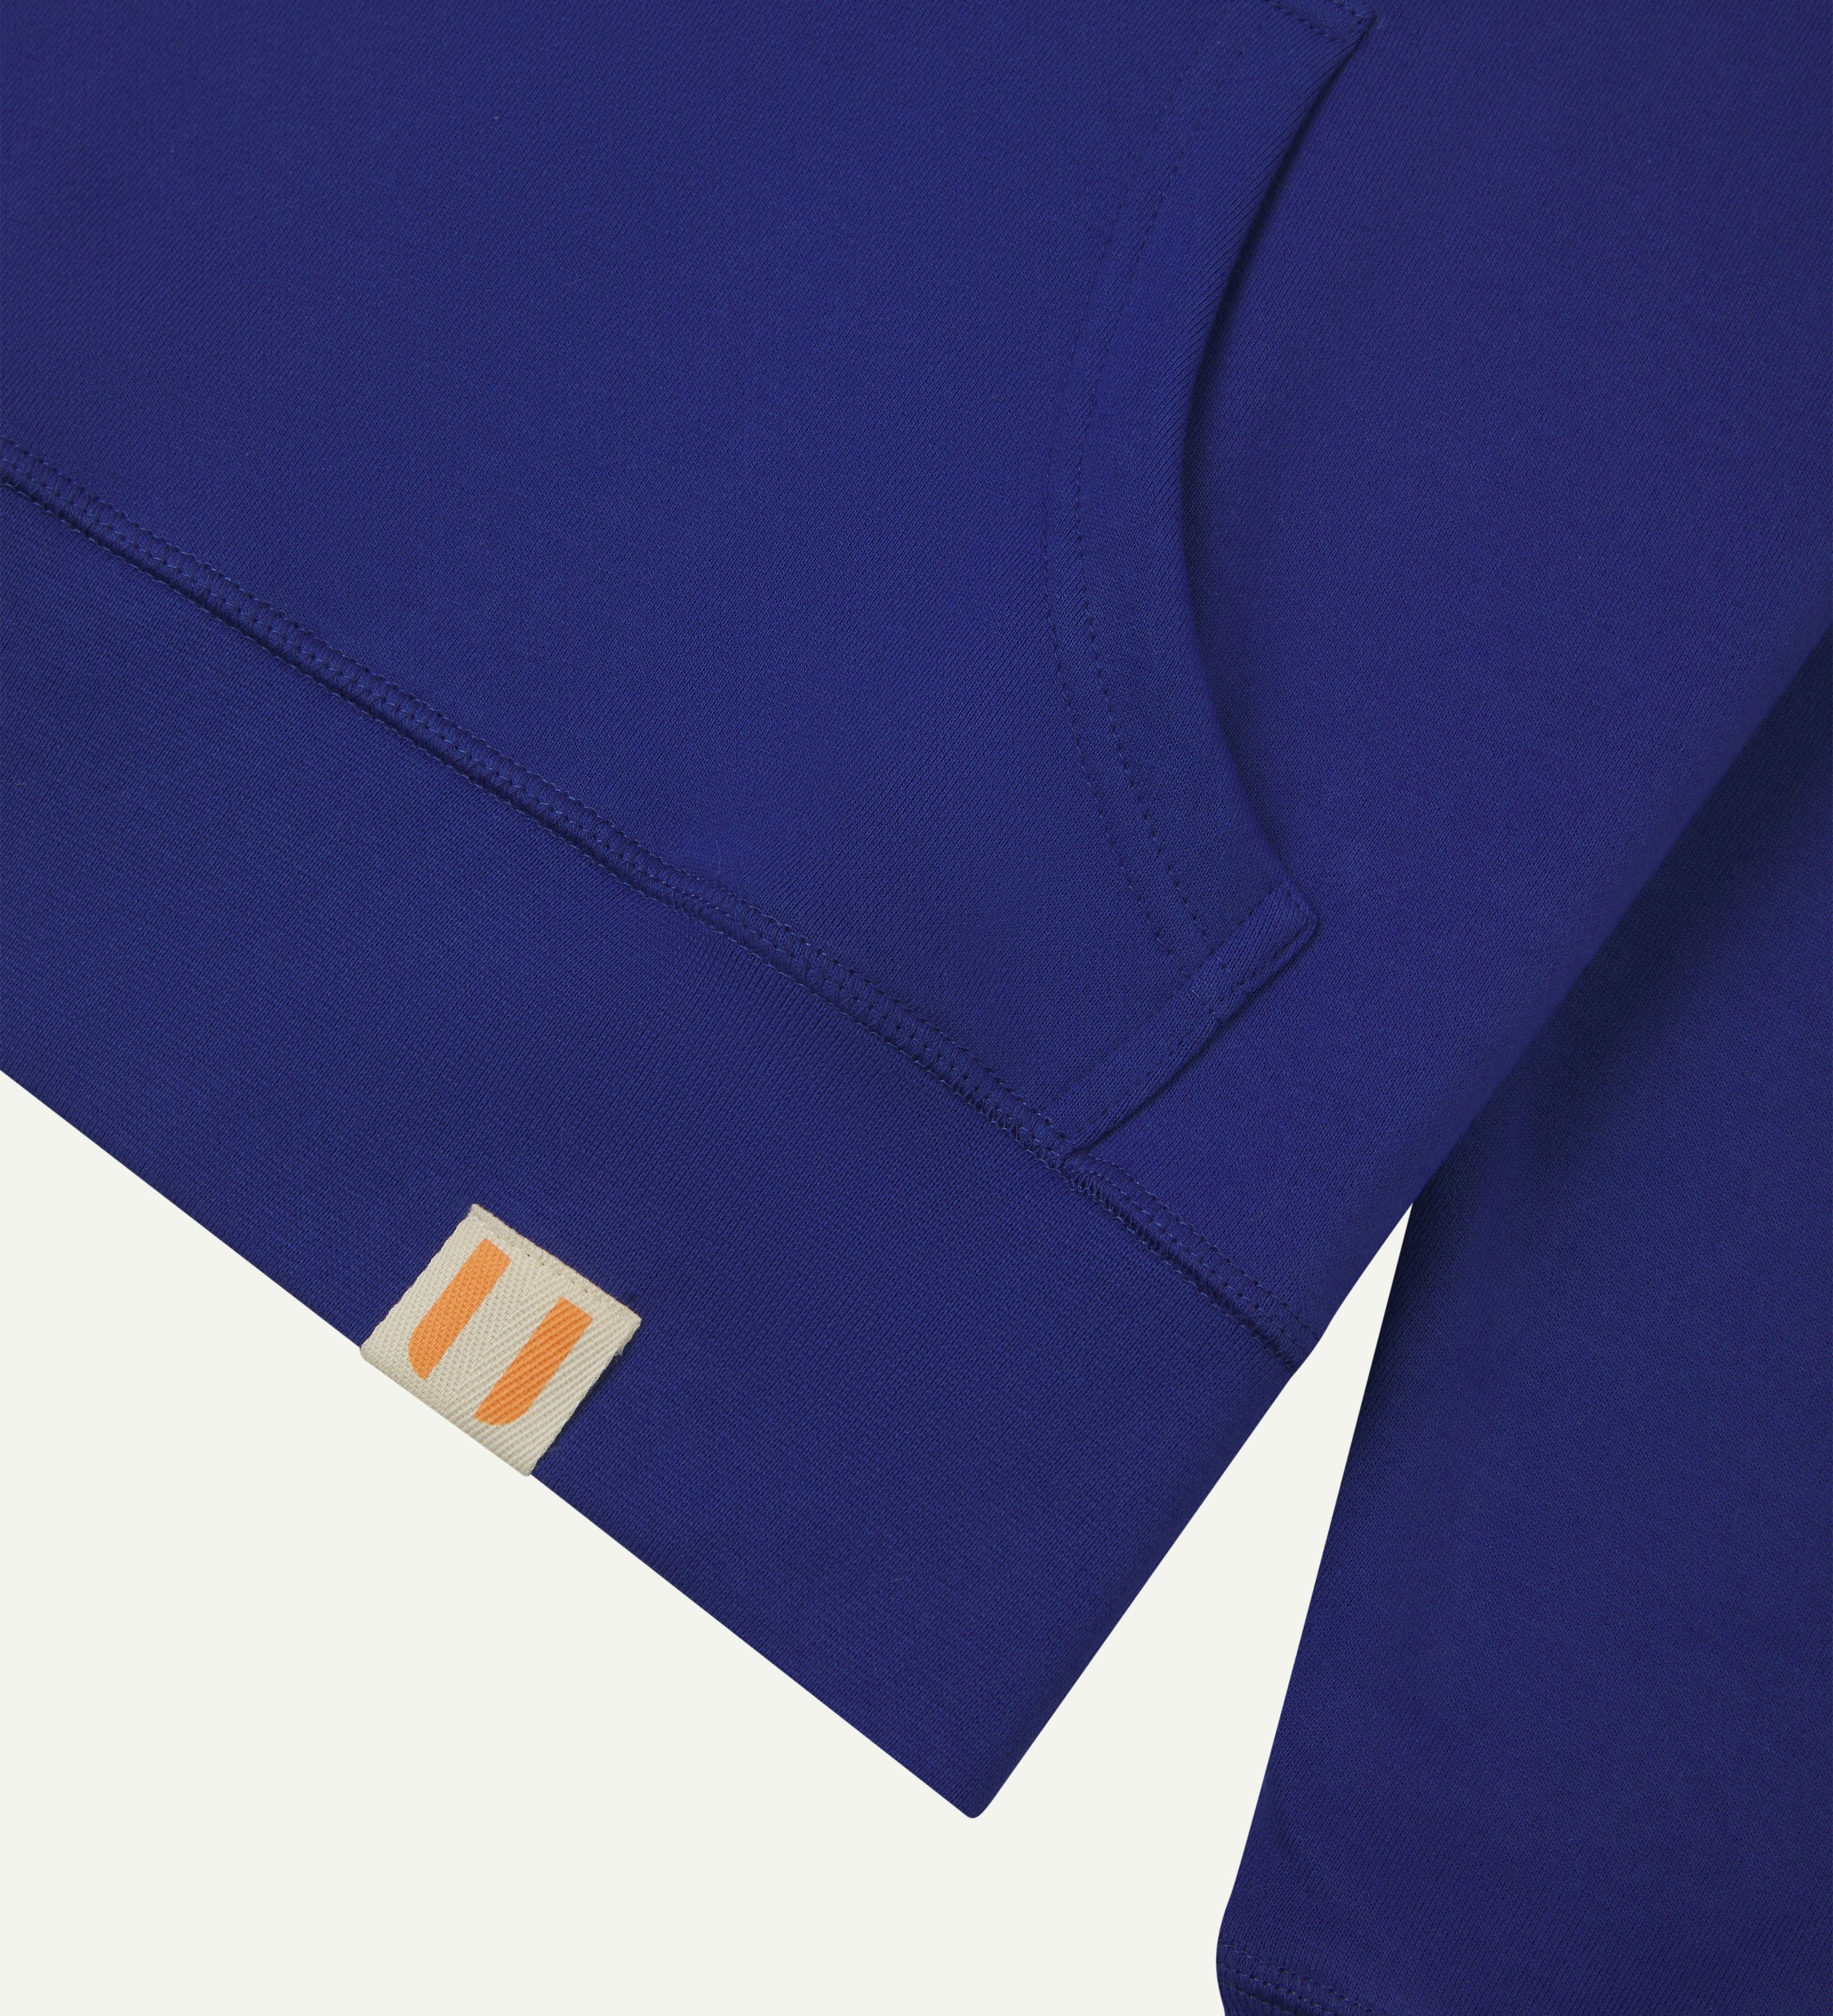 Front pocket detail view of vivid ultra blue organic cotton #7004  hooded sweatshirt by Uskees